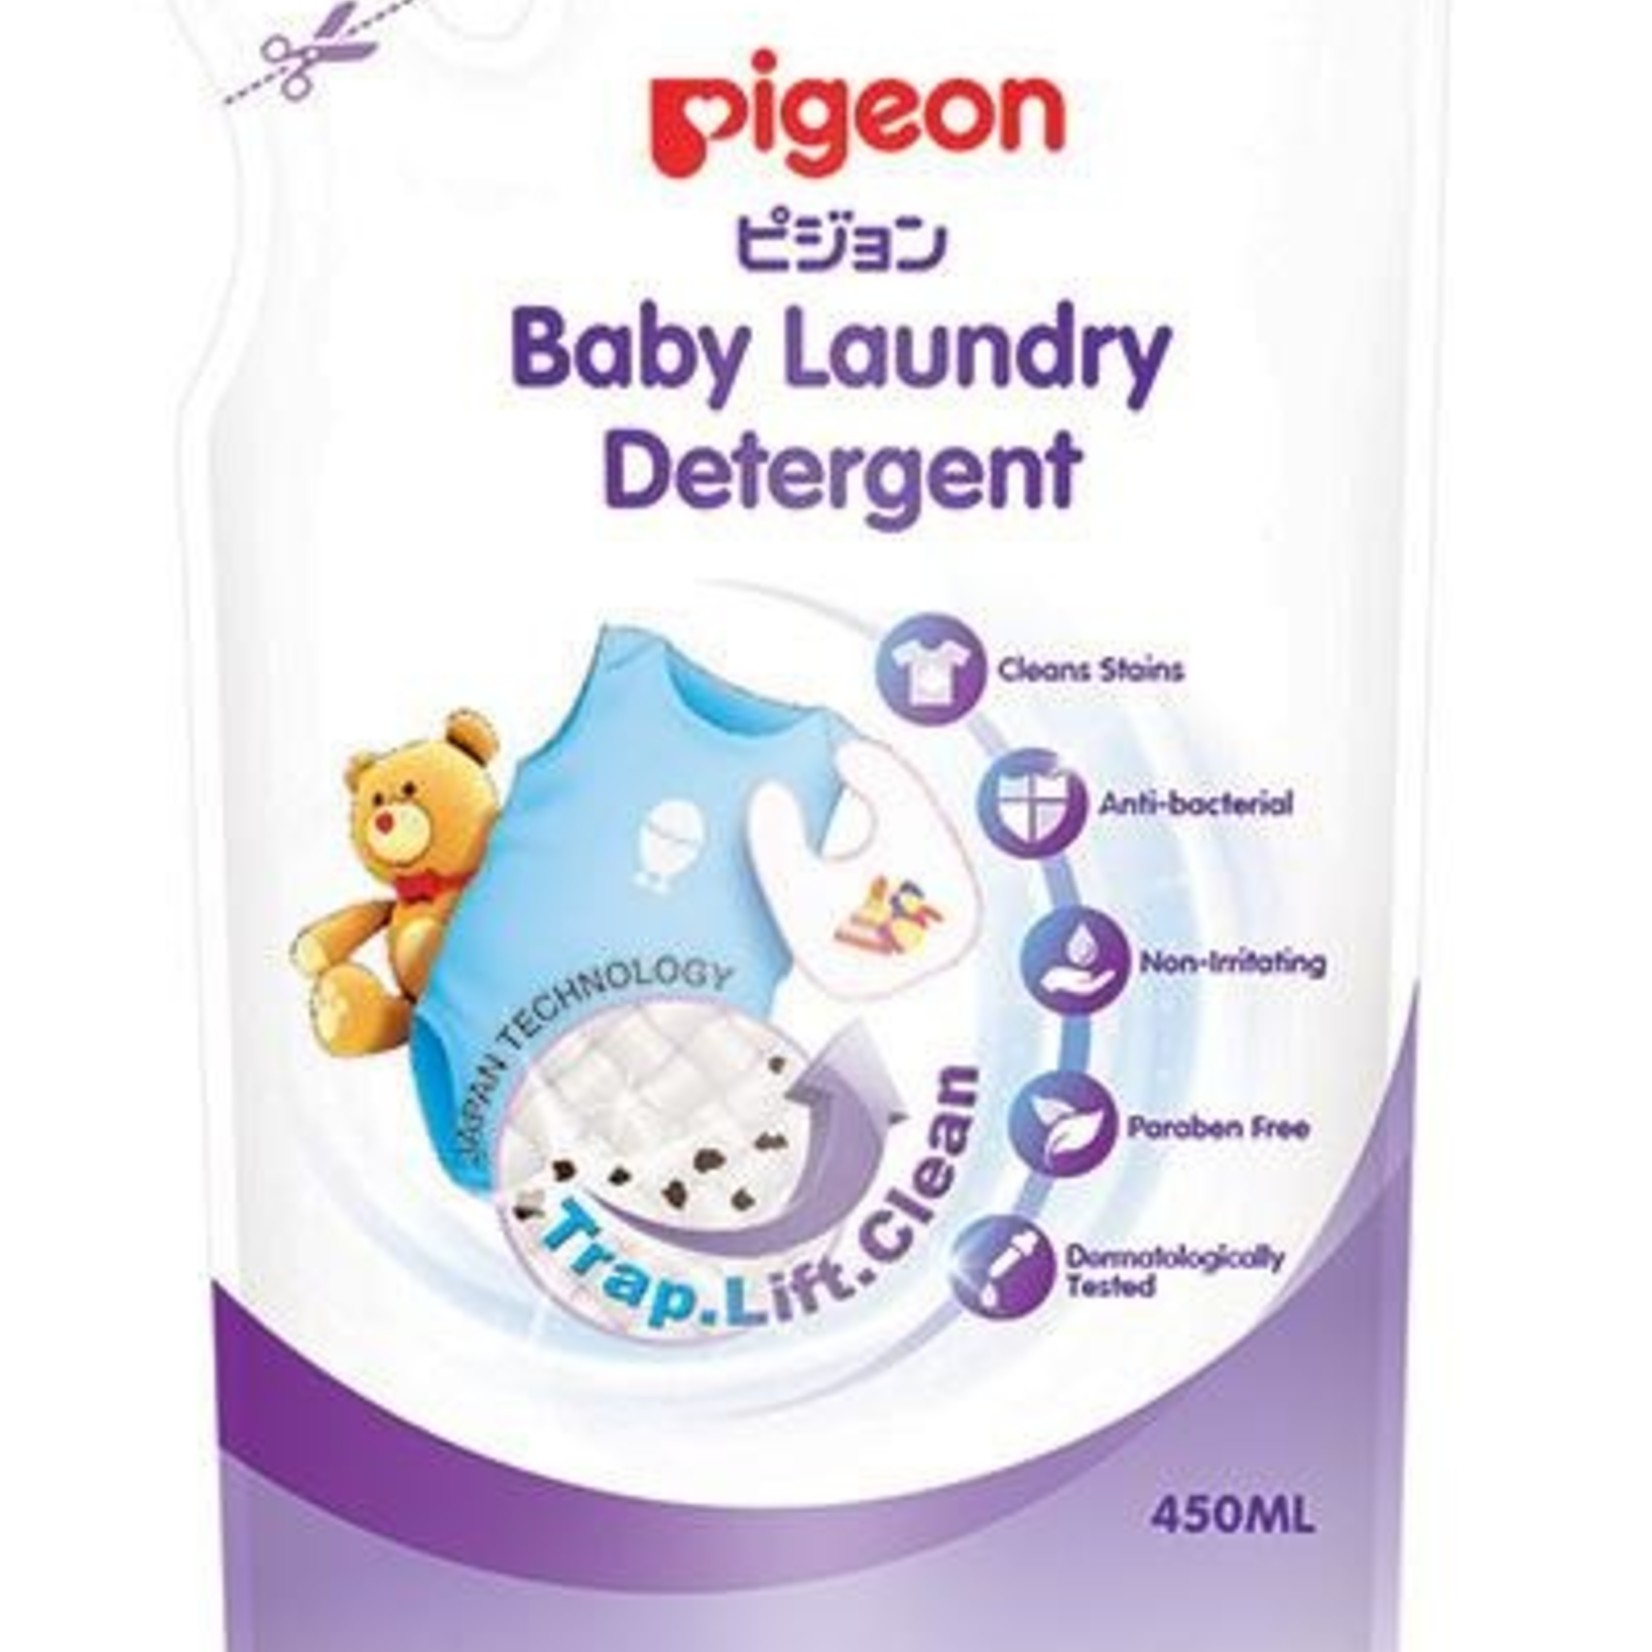 Pigeon Baby Laundry Detergent 450ml Refill